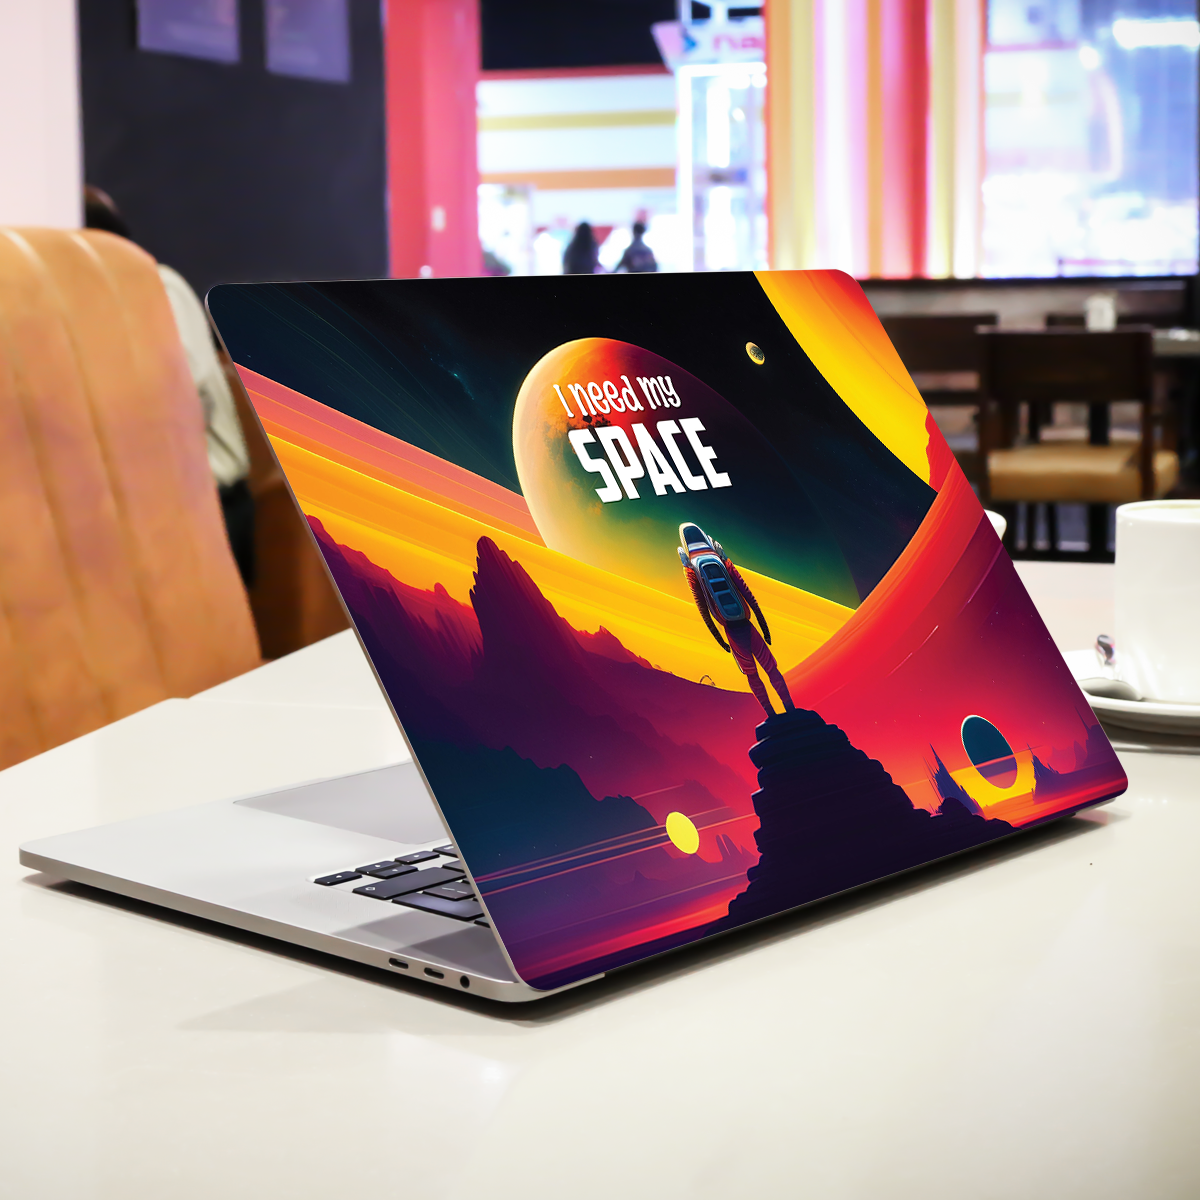 I need my Space Quote Laptop Skin